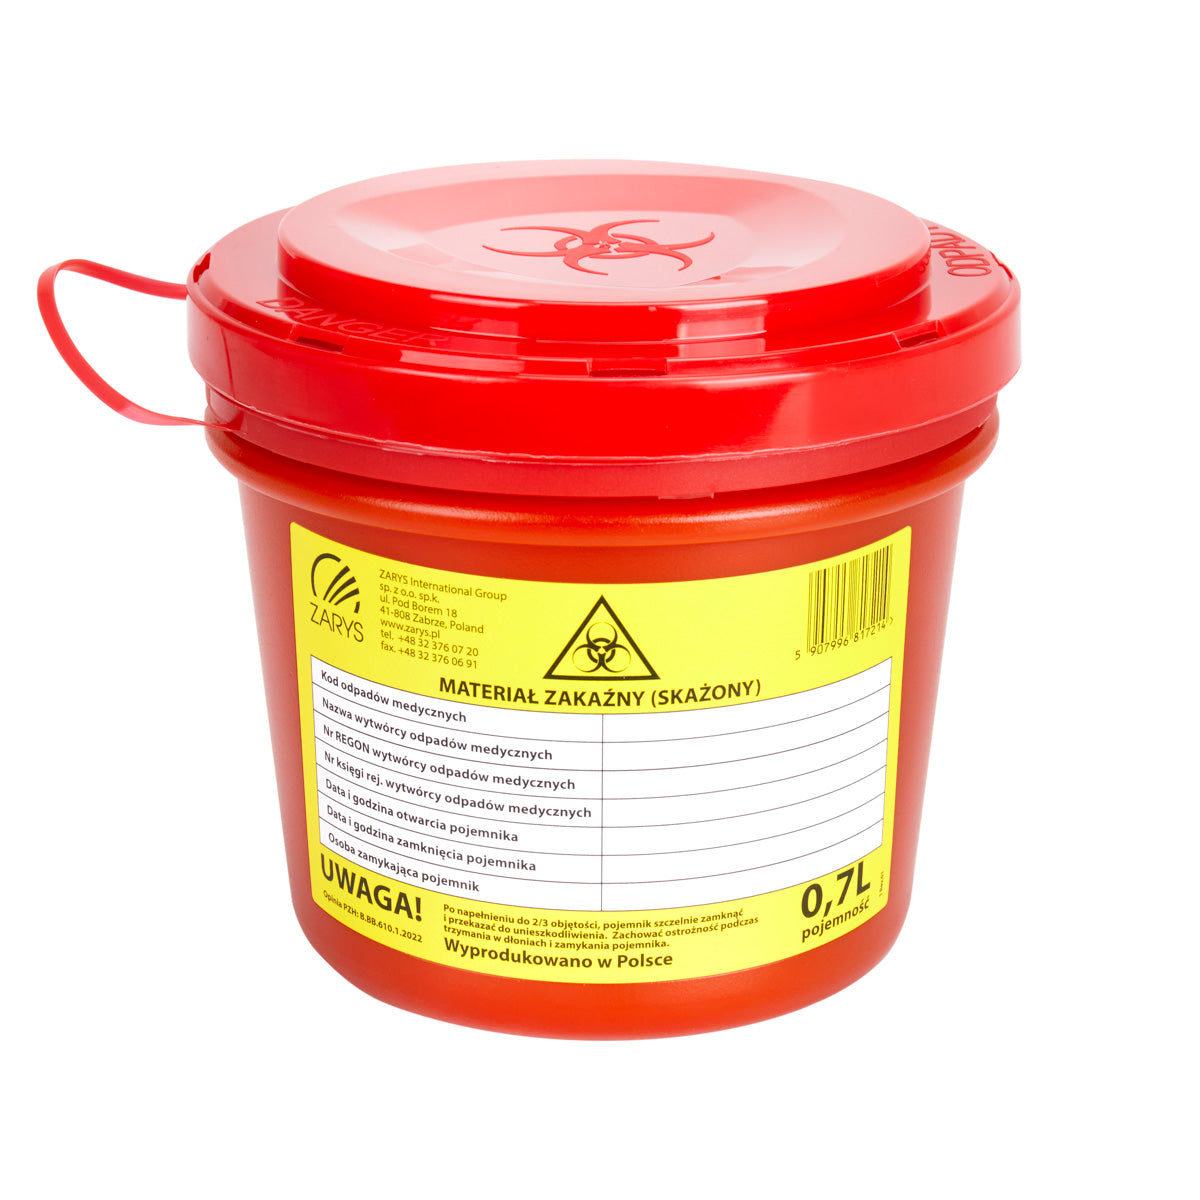 MEDICAL WASTE CONTAINER 0.7 L RED